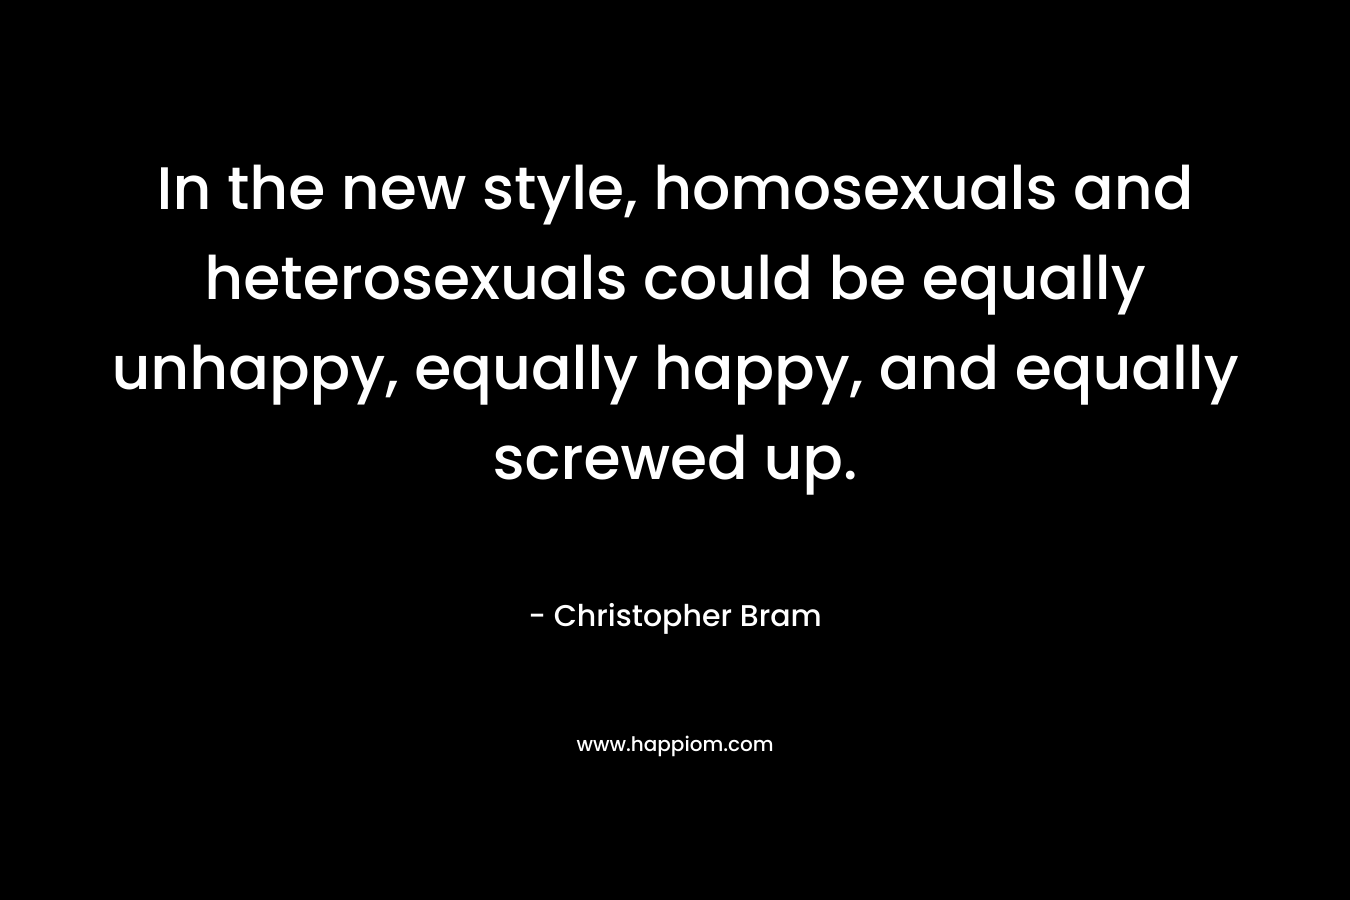 In the new style, homosexuals and heterosexuals could be equally unhappy, equally happy, and equally screwed up. – Christopher Bram